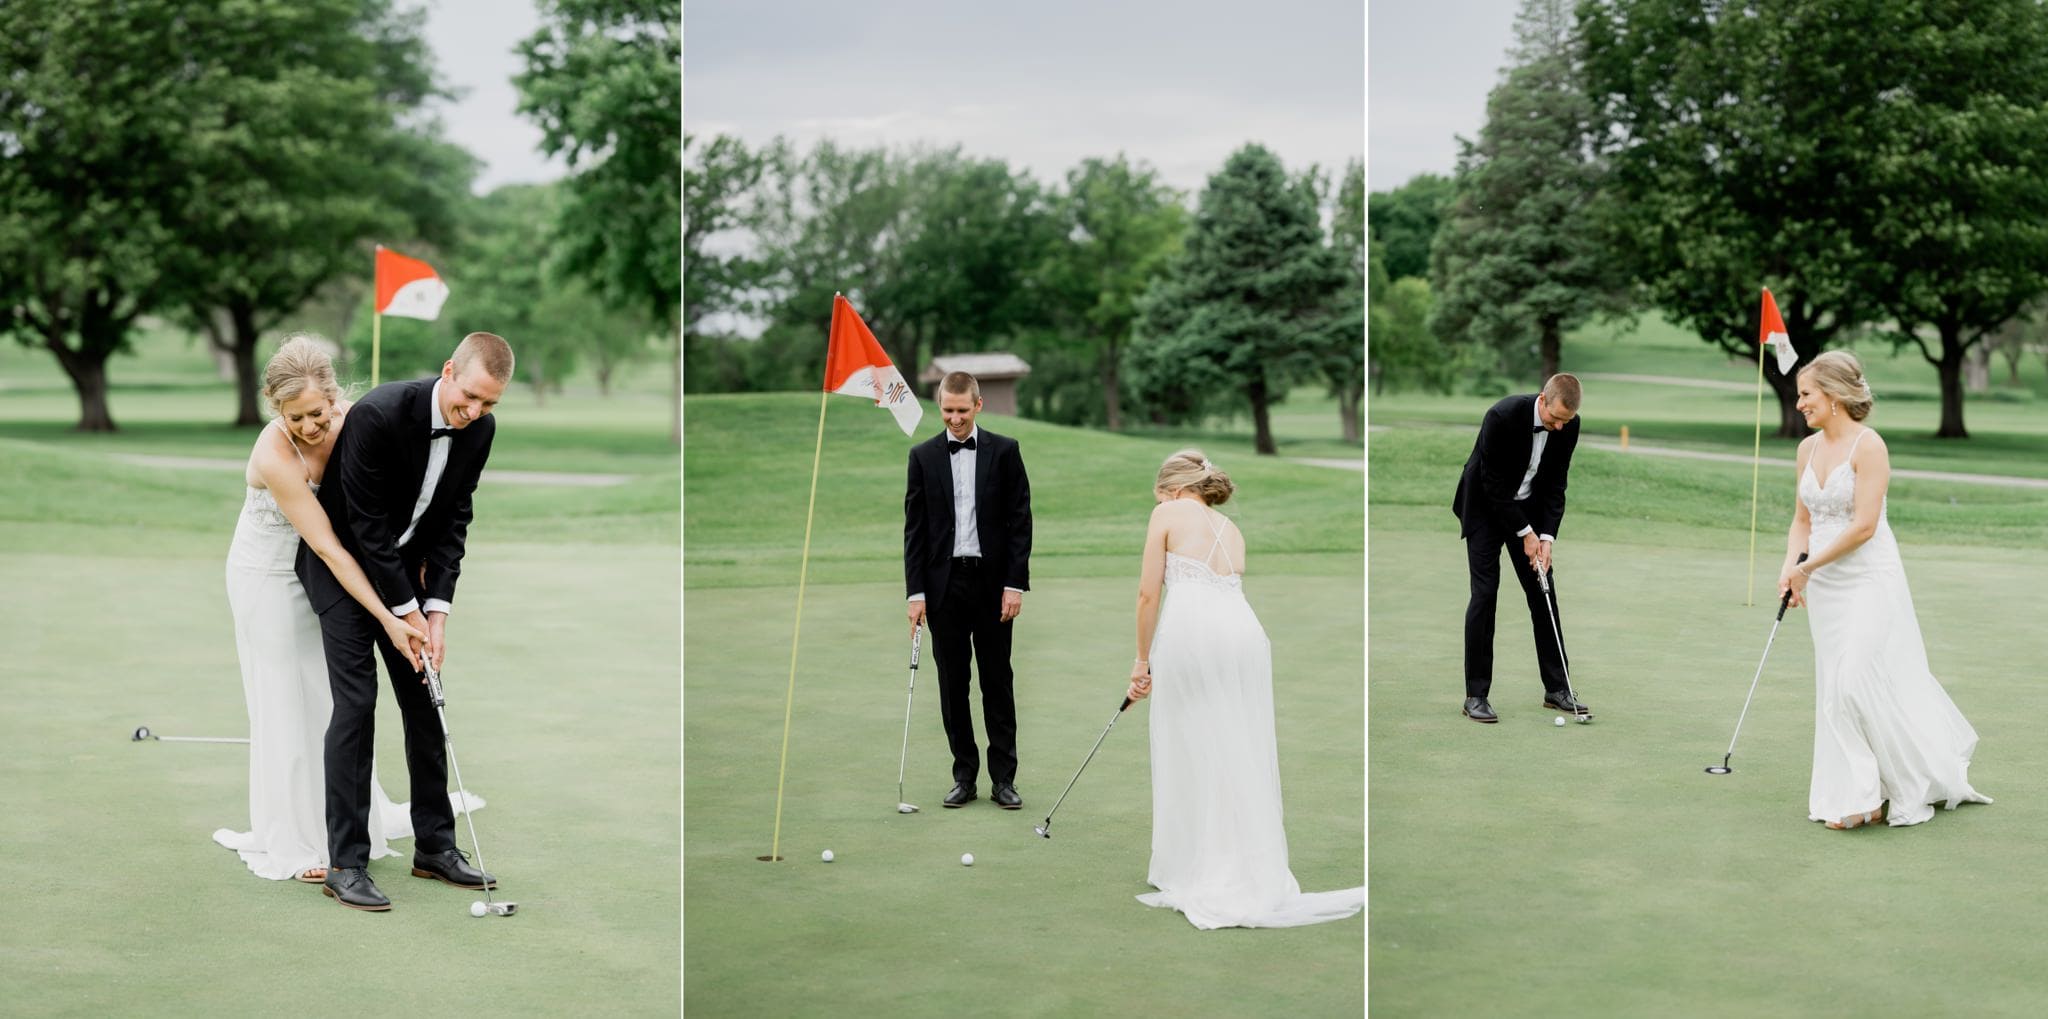 bride and groom playing golf on their wedding day